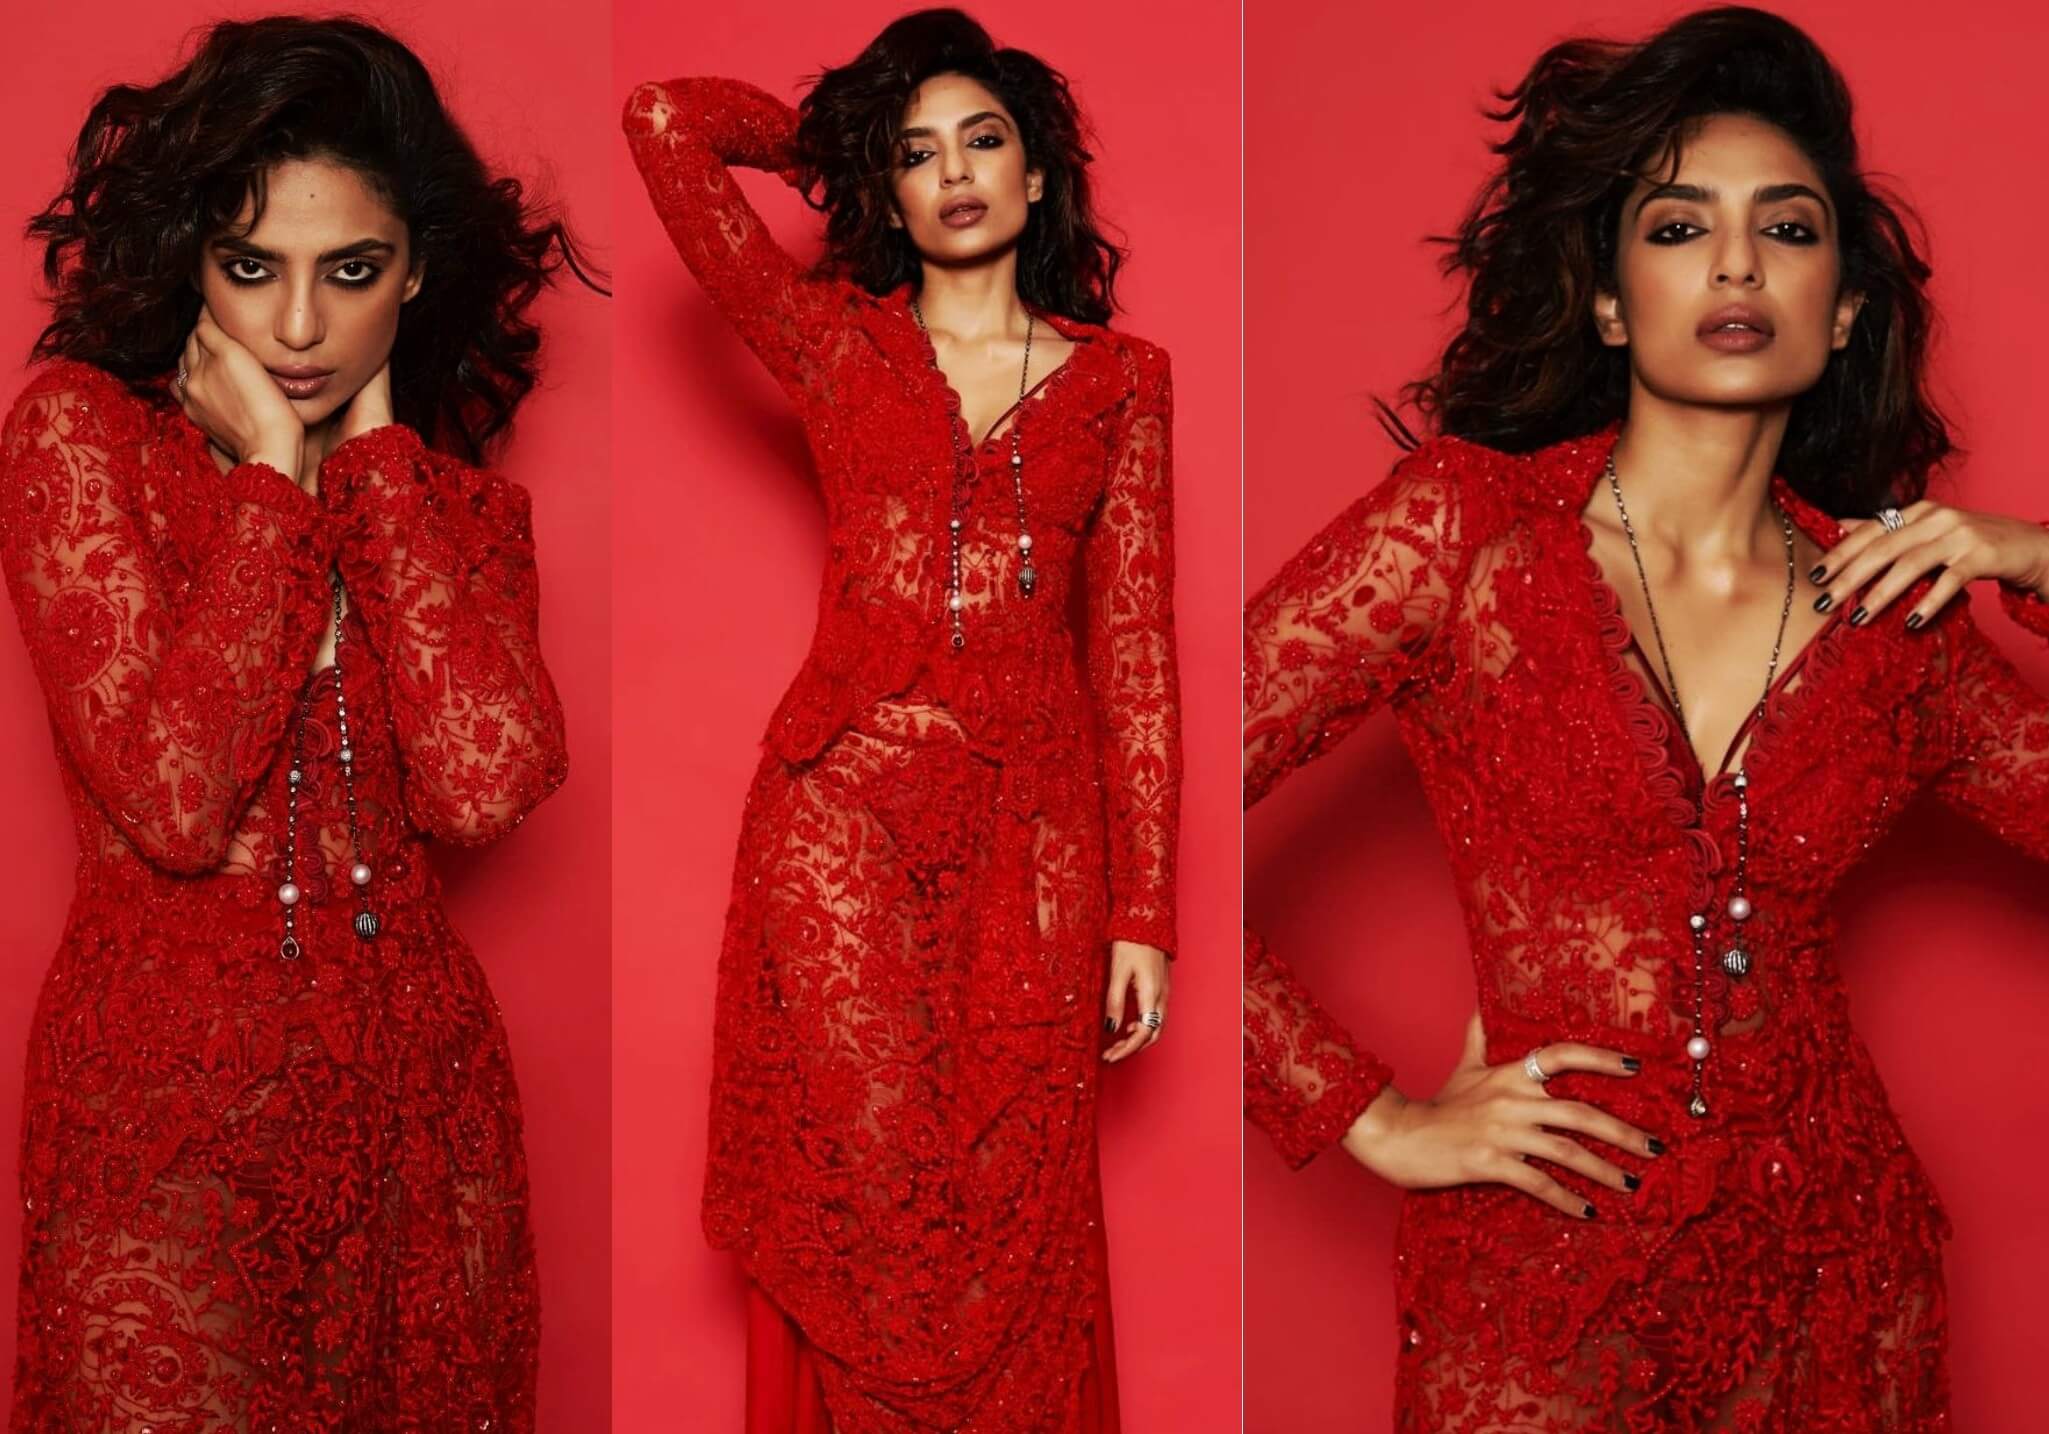 sobhita dhulipala in a sexy see through red gown photo at filmfare ott awards